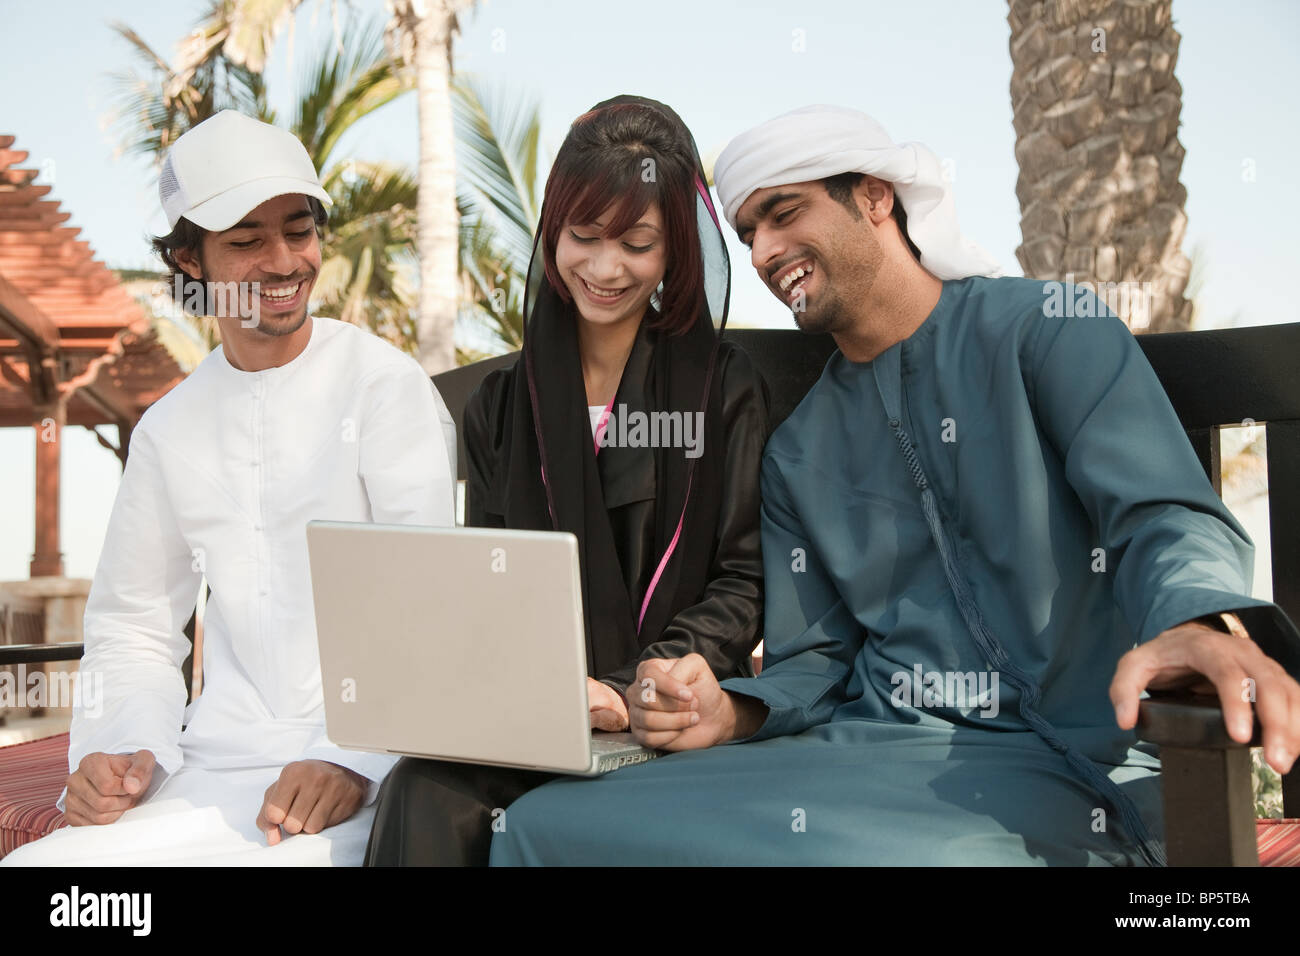 Middle Eastern people using laptop Banque D'Images